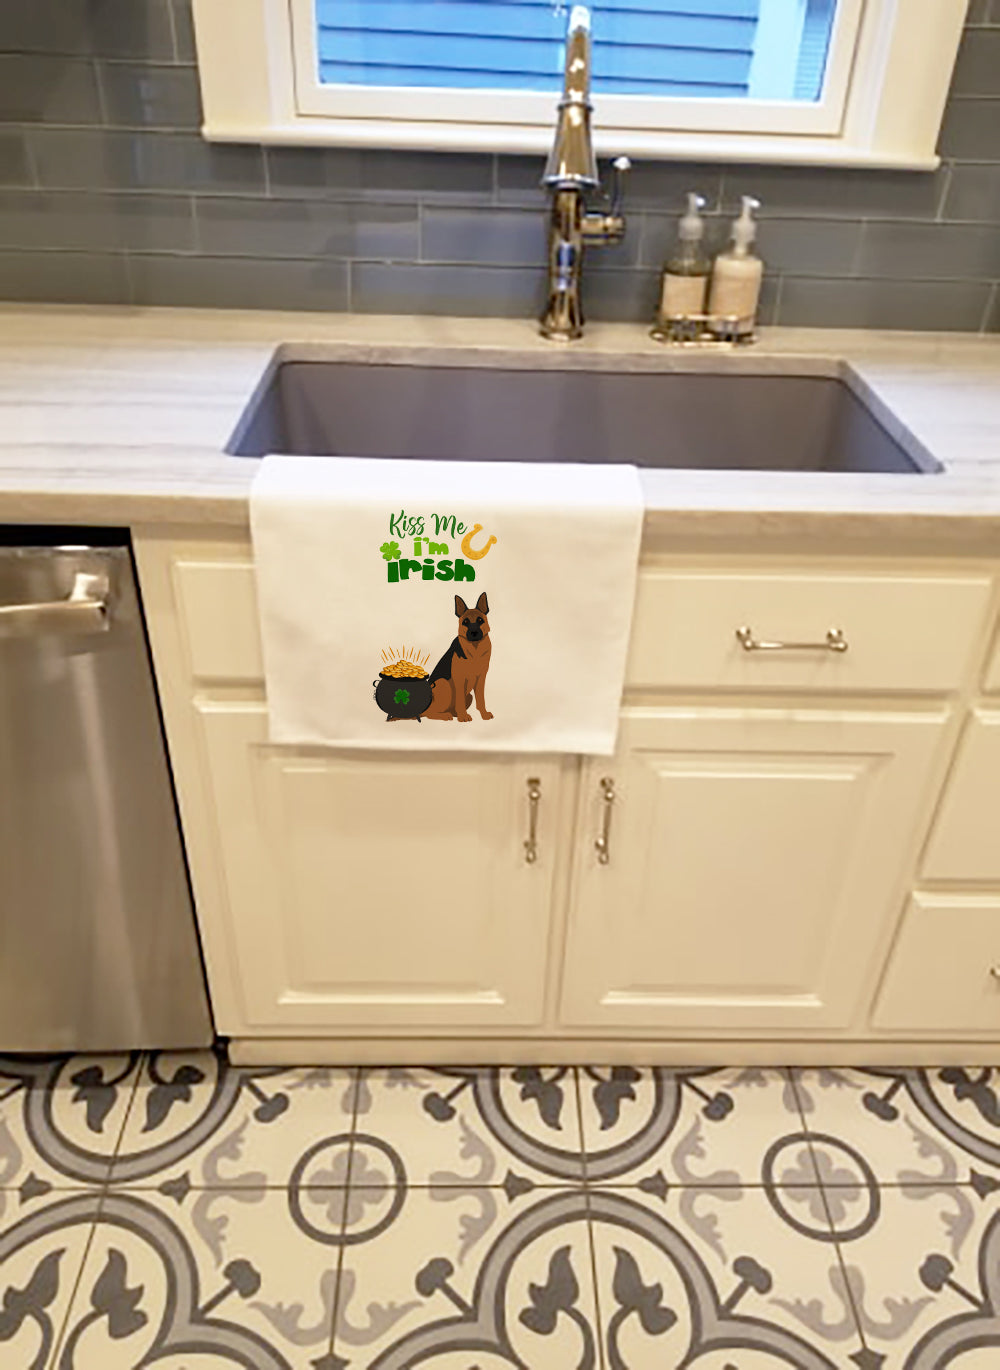 Buy this Black and Tan German Shepherd St. Patrick's Day White Kitchen Towel Set of 2 Dish Towels